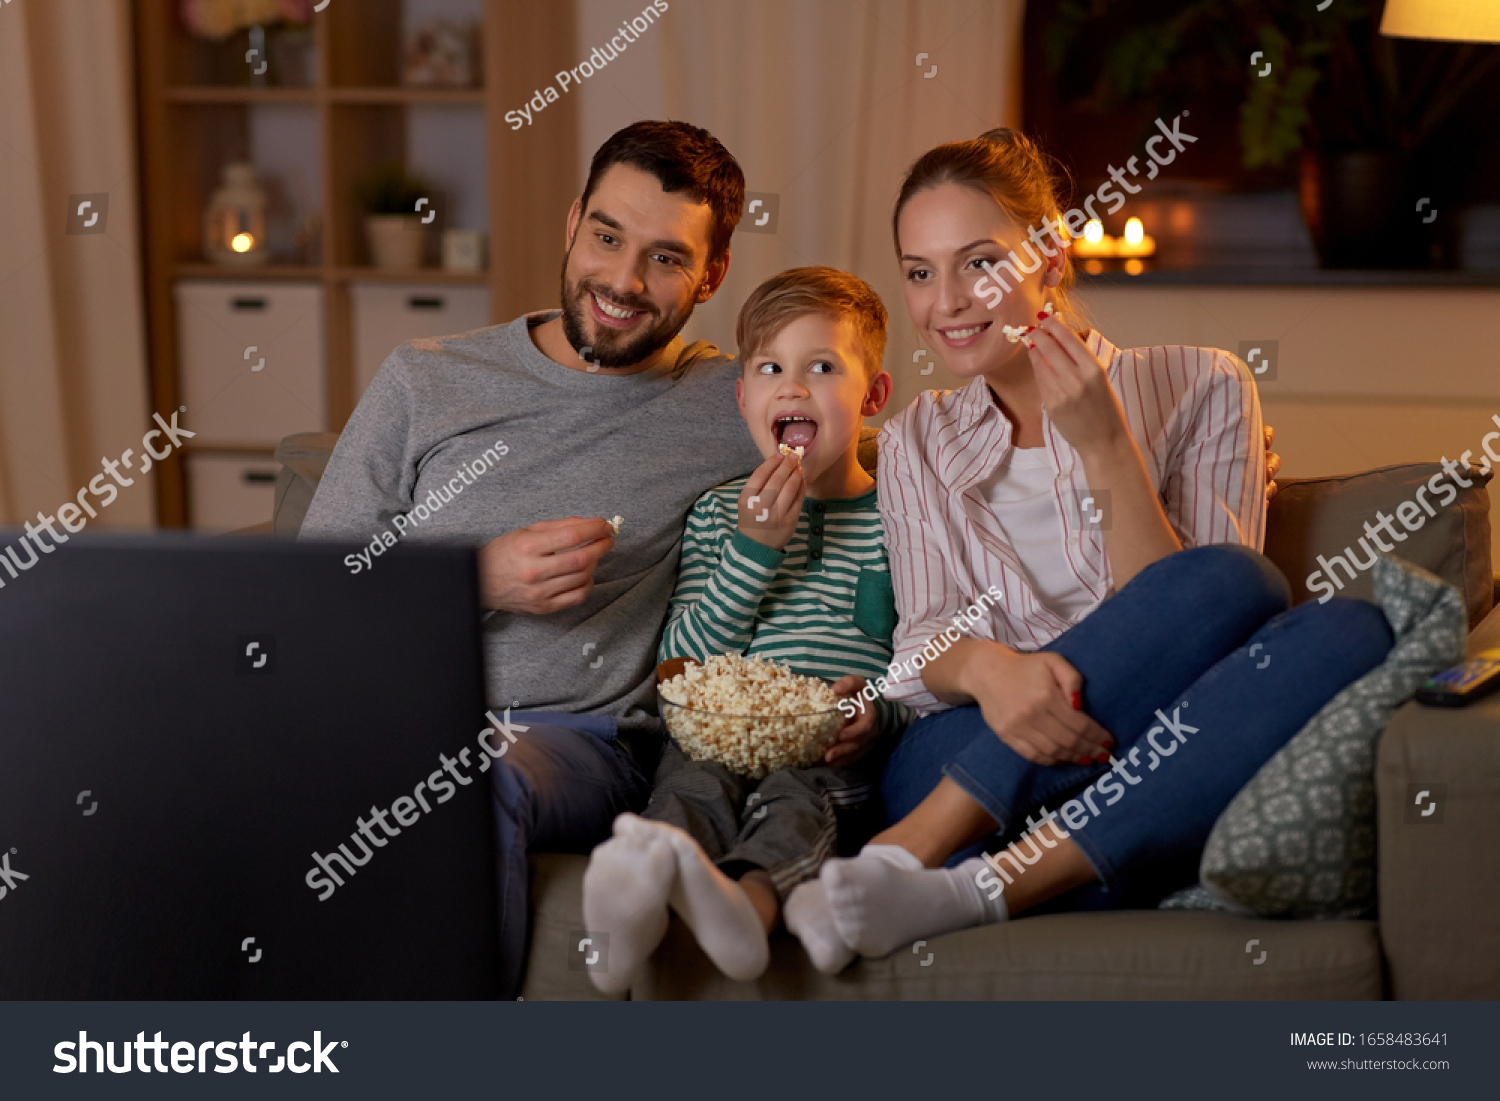 family, leisure and people concept - happy smiling father, mother and little son eating popcorn and watching tv at home in evening #1658483641